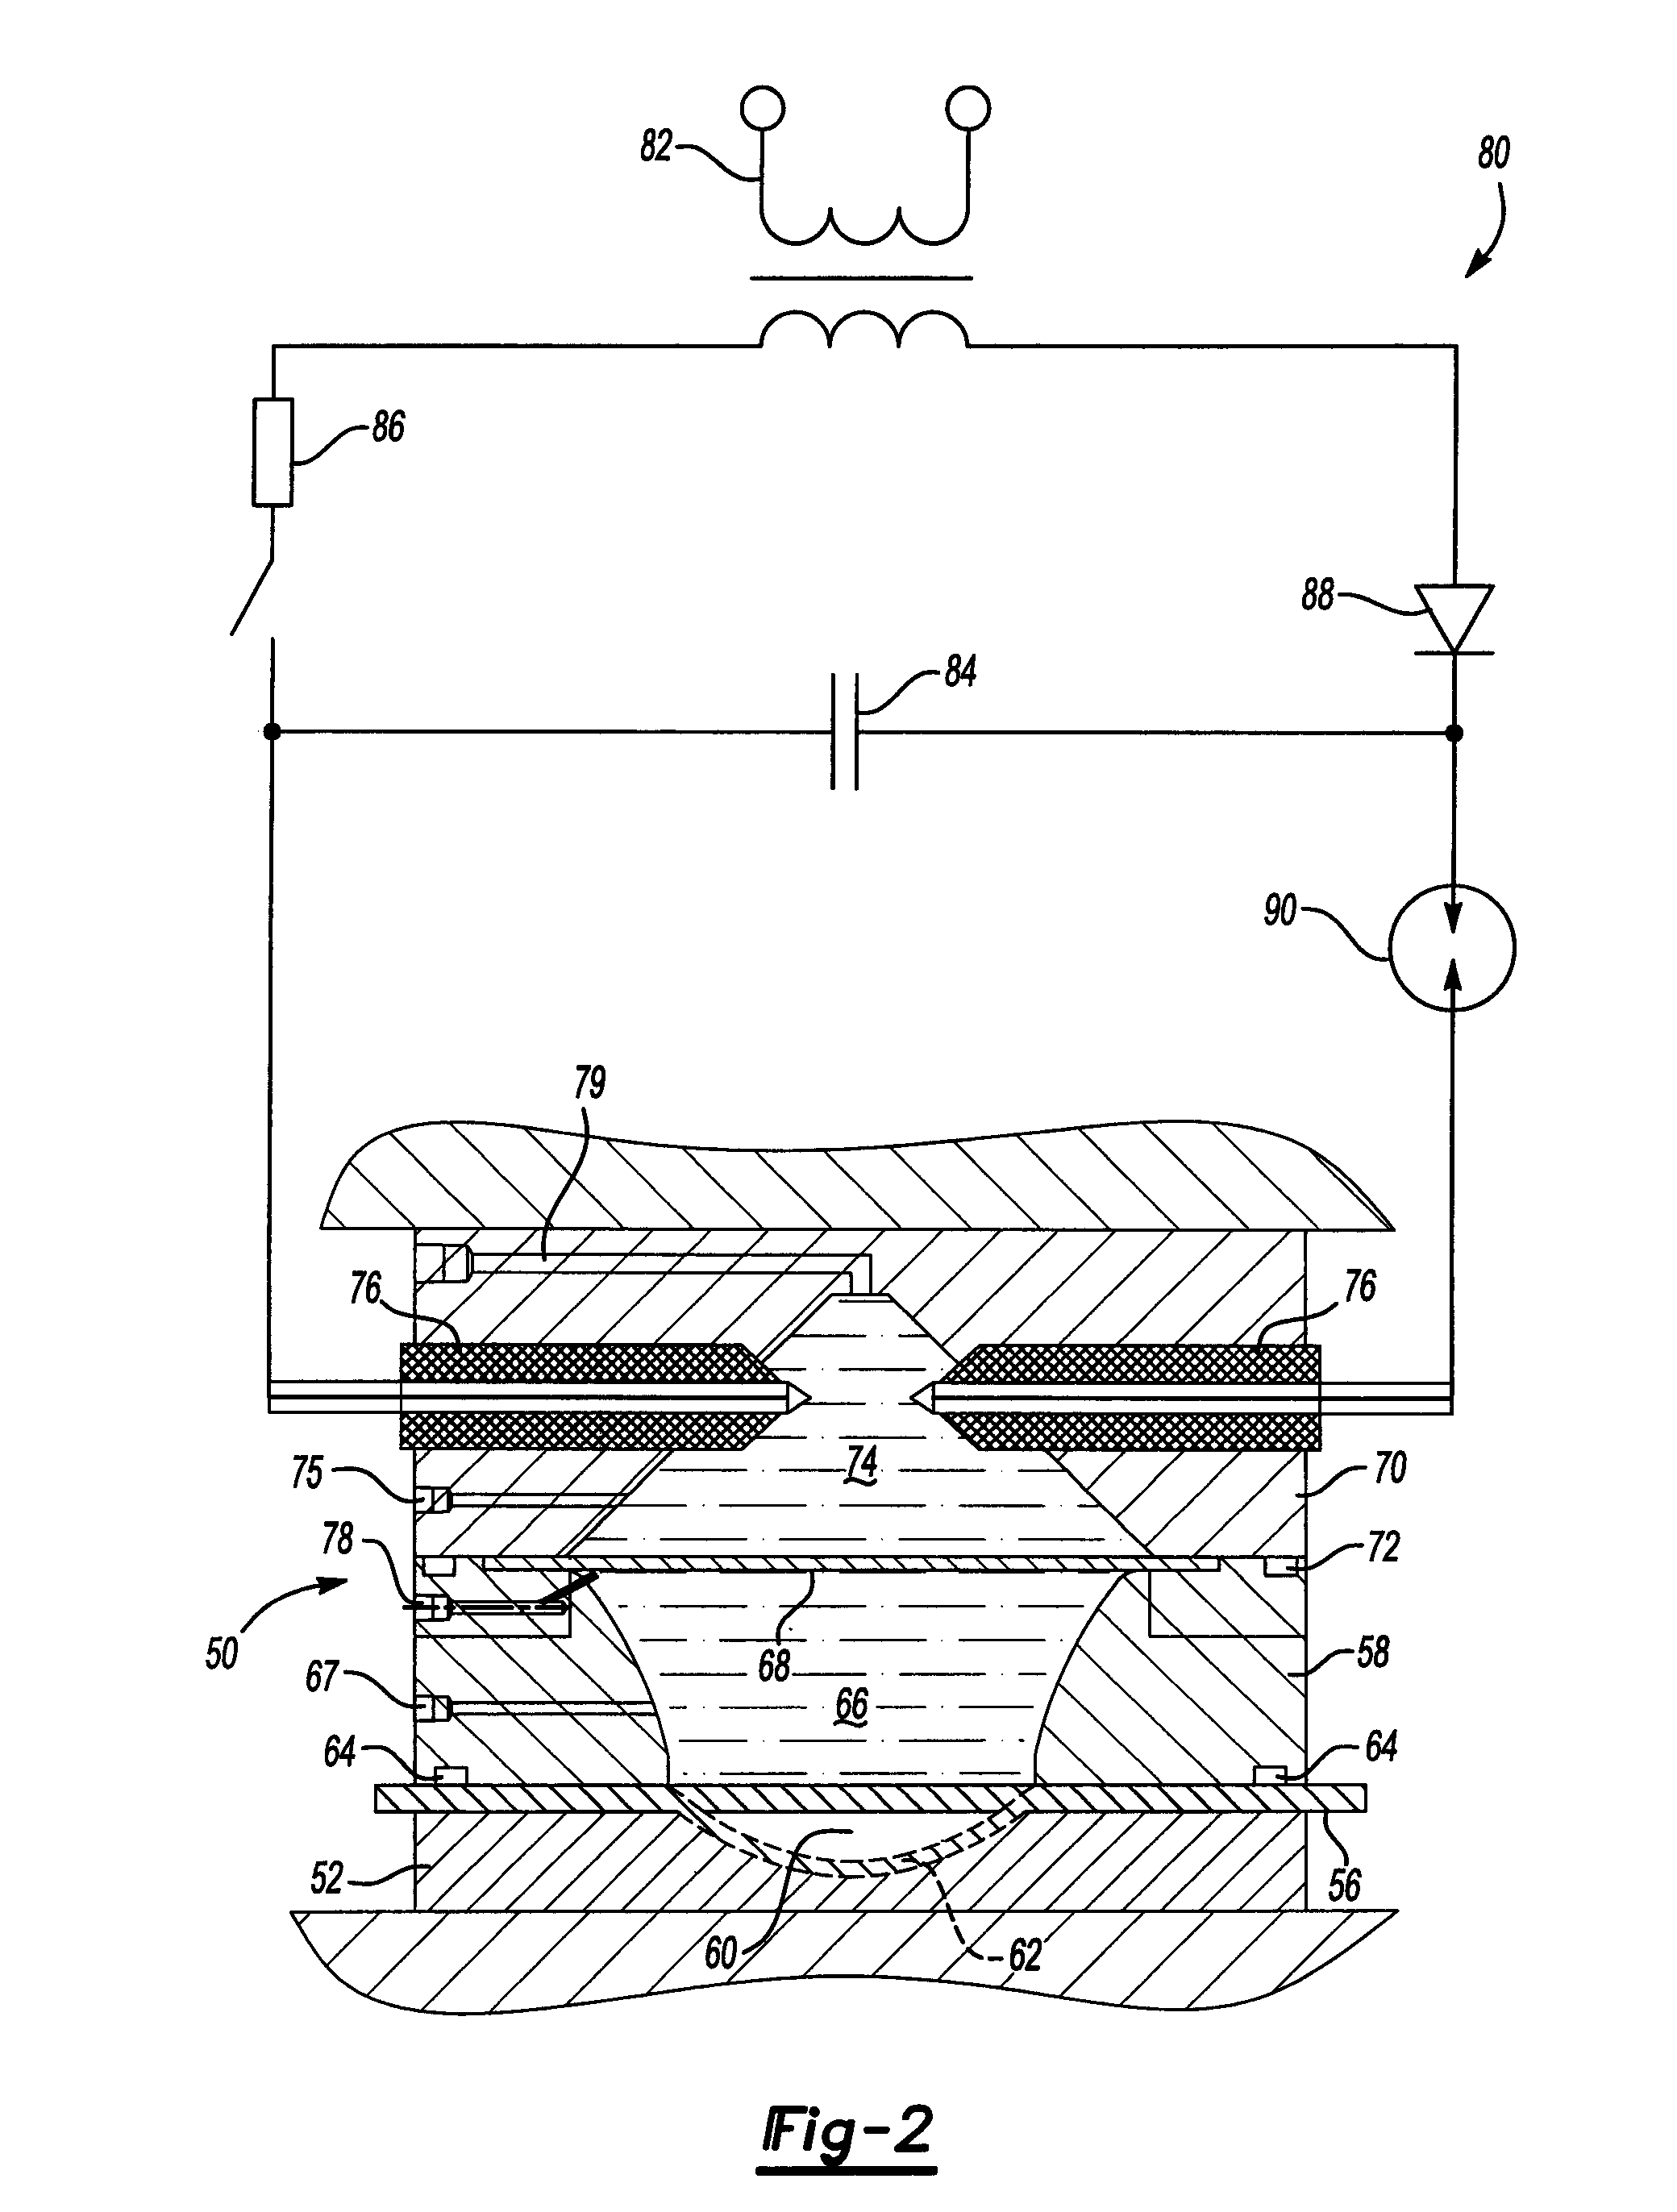 Electro-hydraulic forming tool having two liquid volumes separated by a membrane